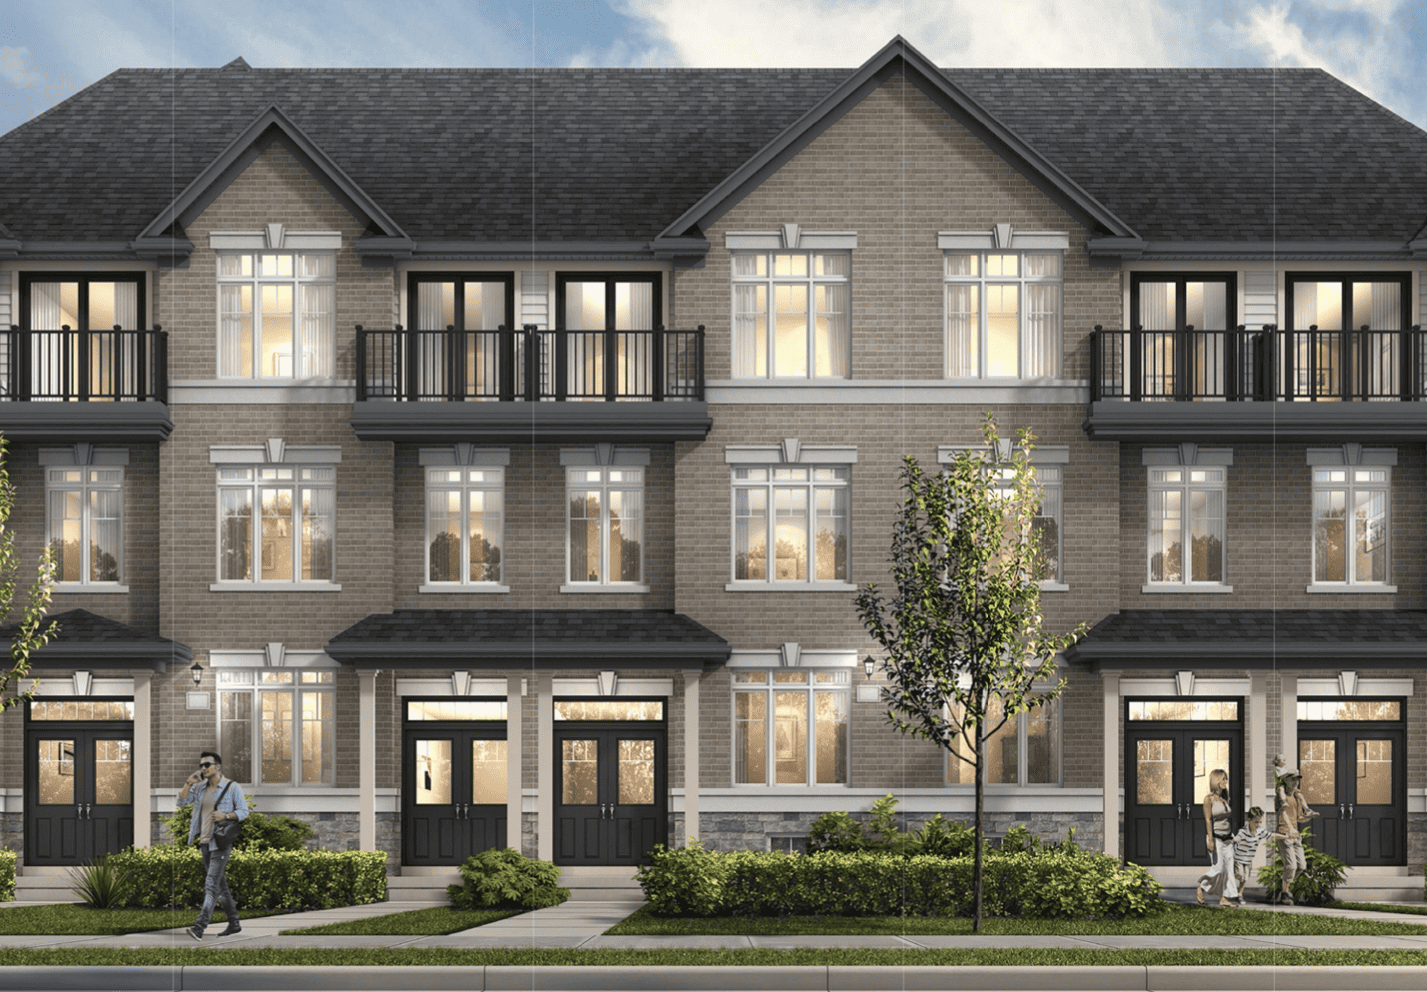 Caledon Towns by Auriga Homes in Caledon